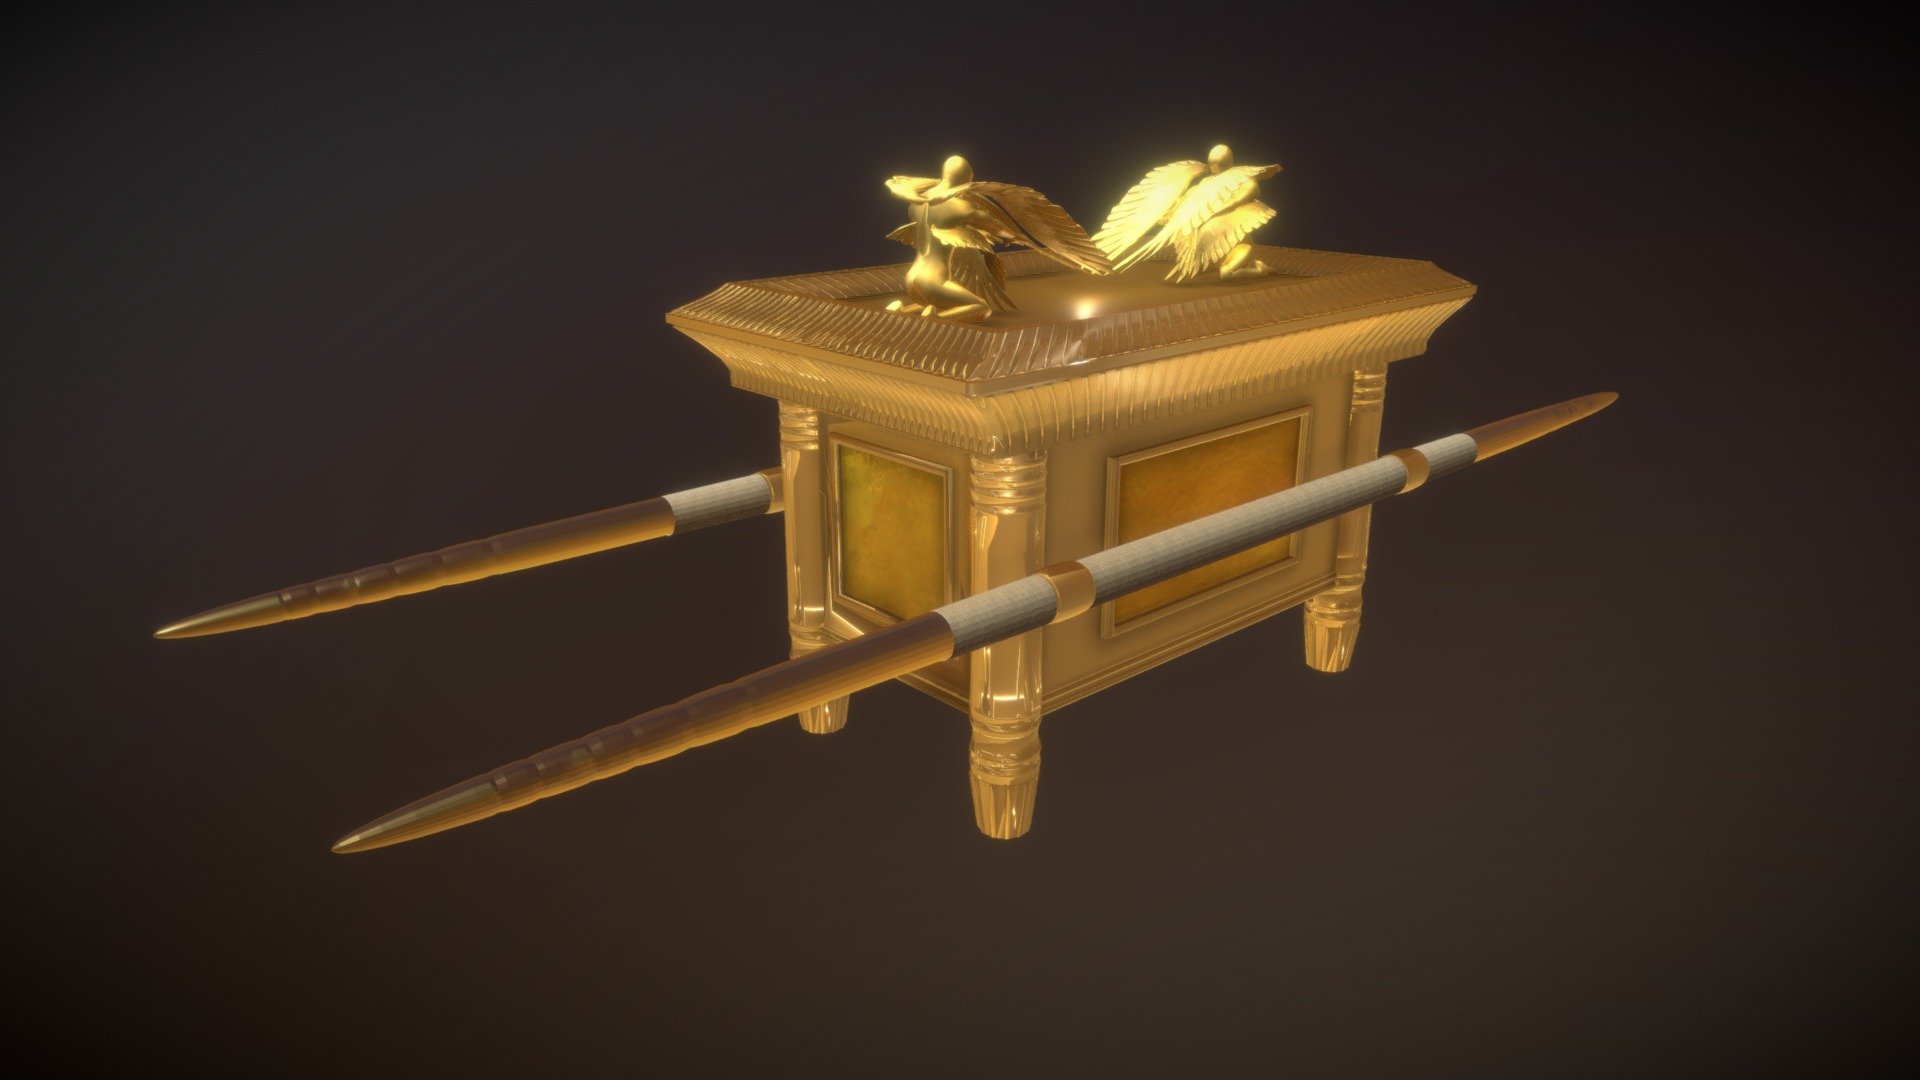 More: https://victormiranda.artstation.com/projects/28xG2K

The Ark of the Covenant, also known as the Ark of the Testimony, and in a few verses across various translations as the Ark of God, is a gold-covered wooden chest with lid cover described in the Book of Exodus as containing the two stone tablets of the Ten Commandments. _Wikipedia - The Ark Of The Covenant - Download Free 3D model by VHM777 (@gizacorp01) 3d model